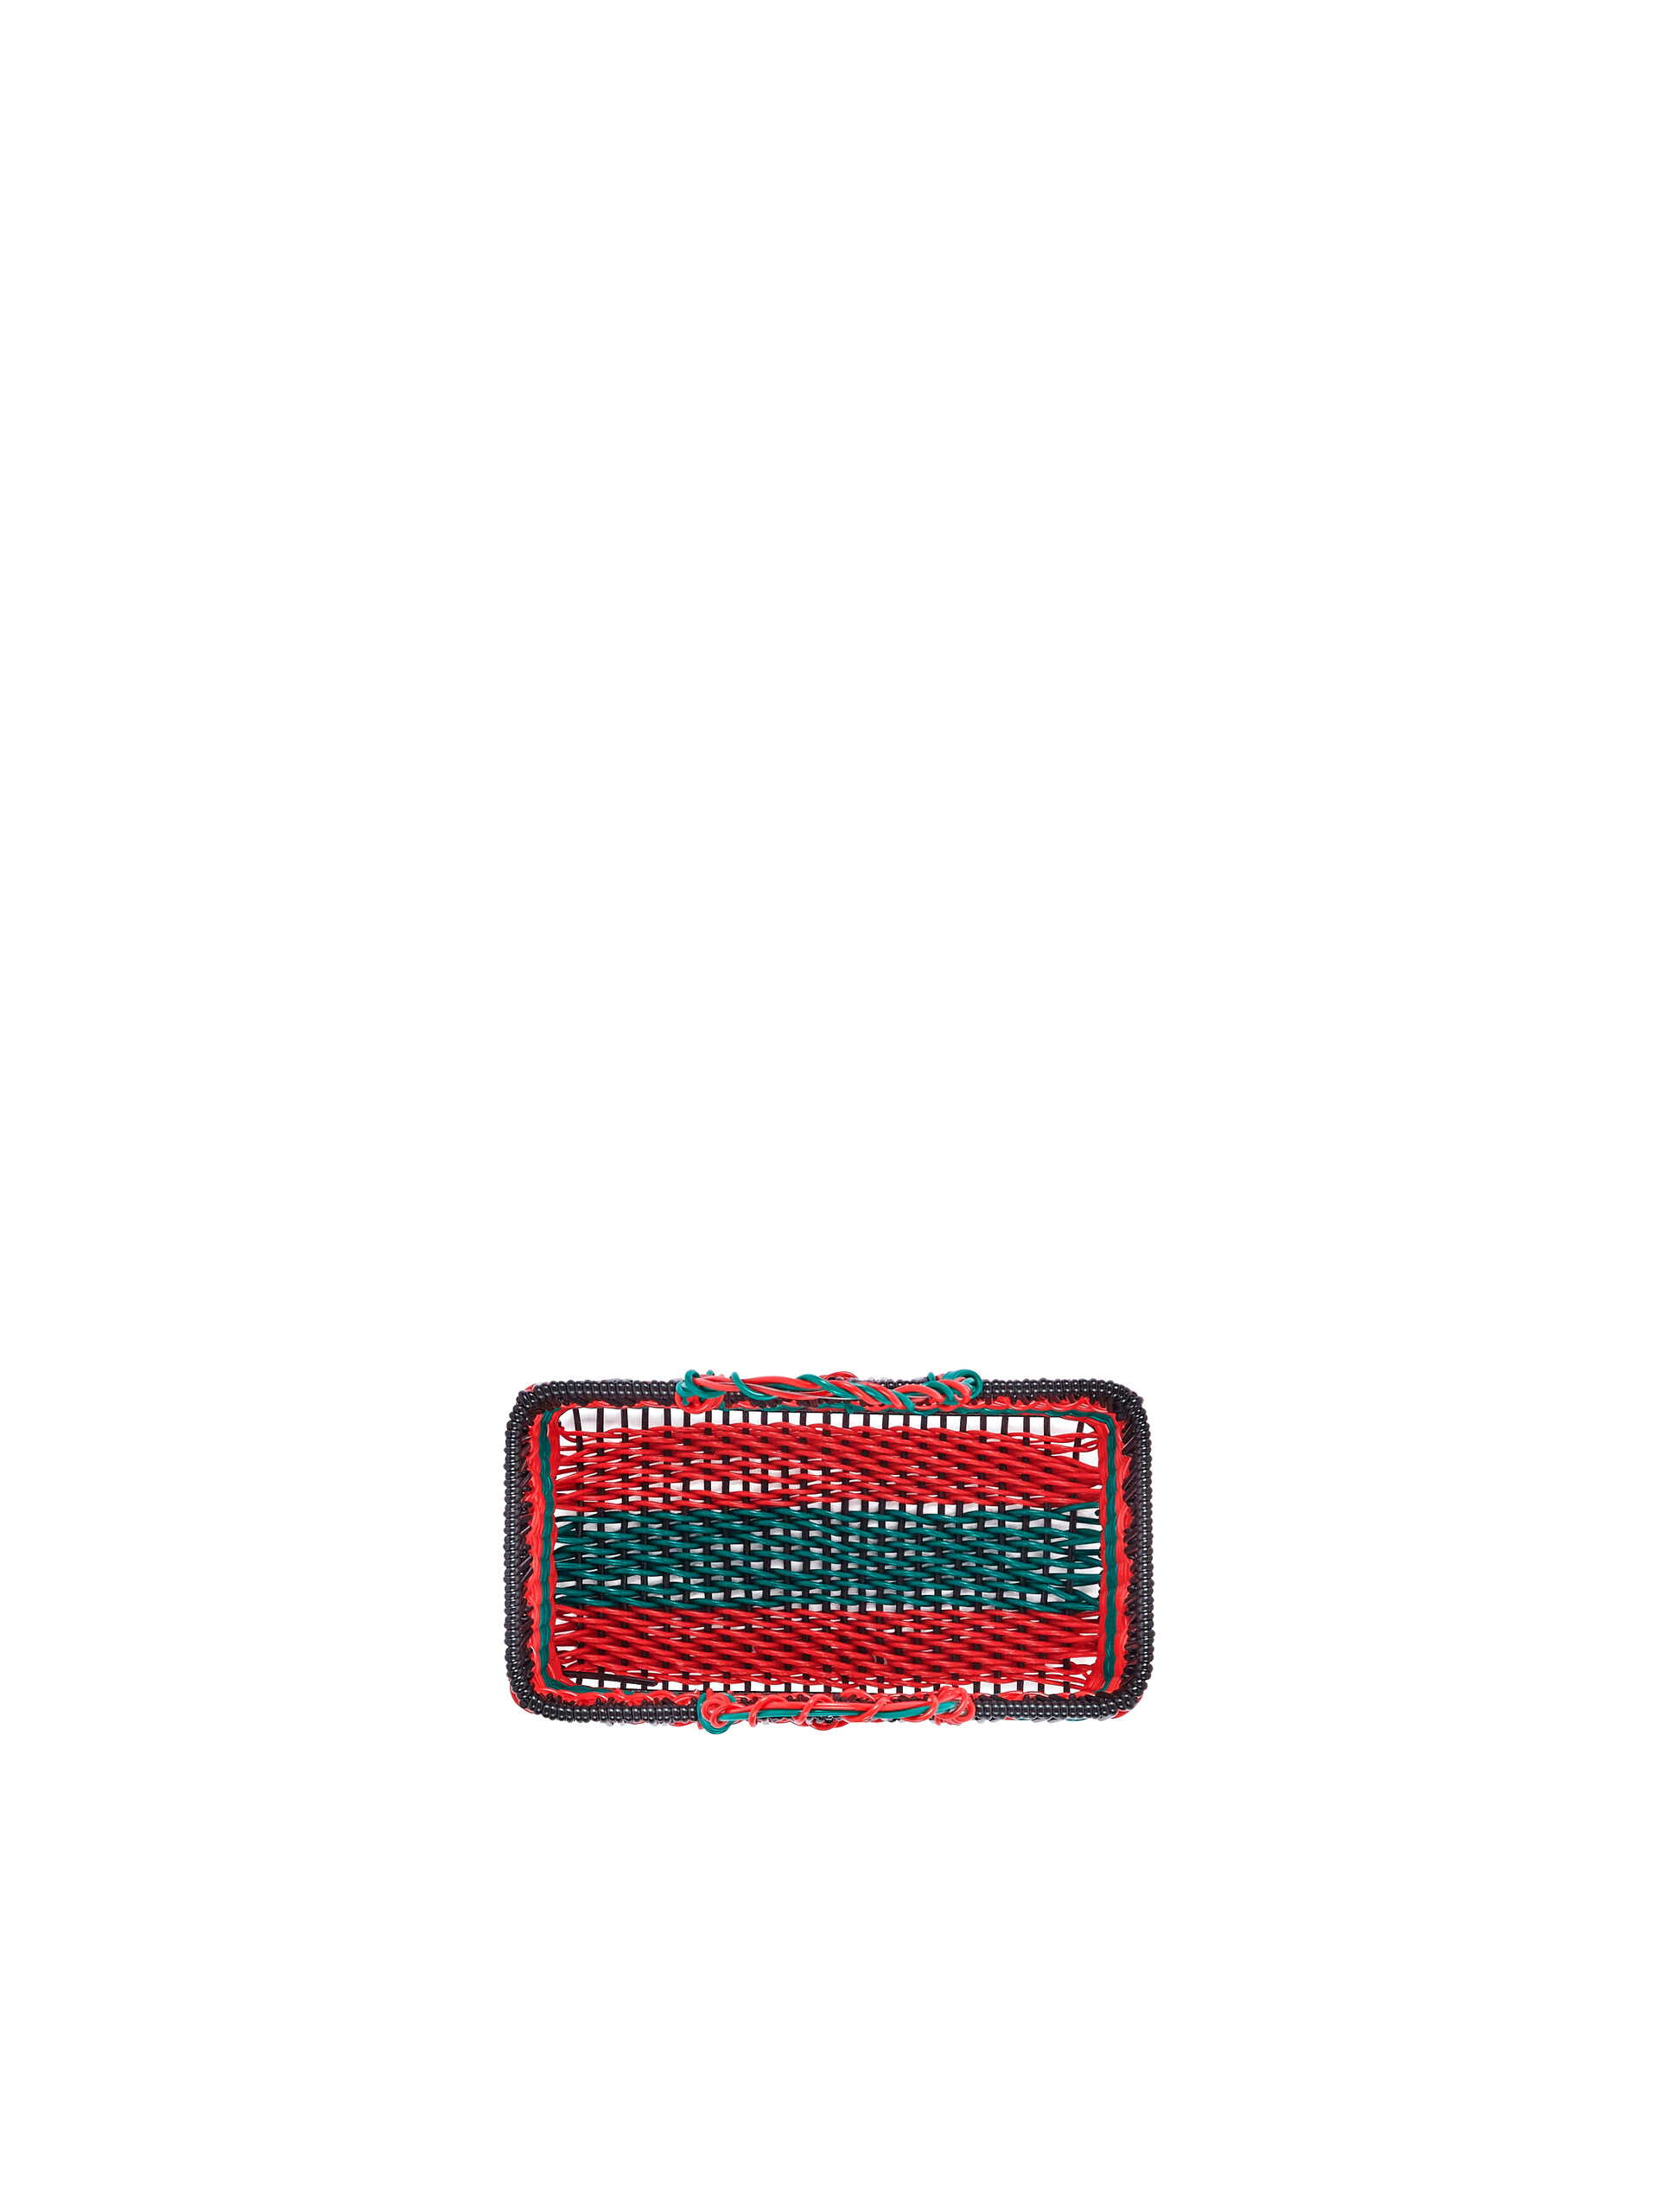 MARNI MARKET green and red basket - Accessories - Image 4